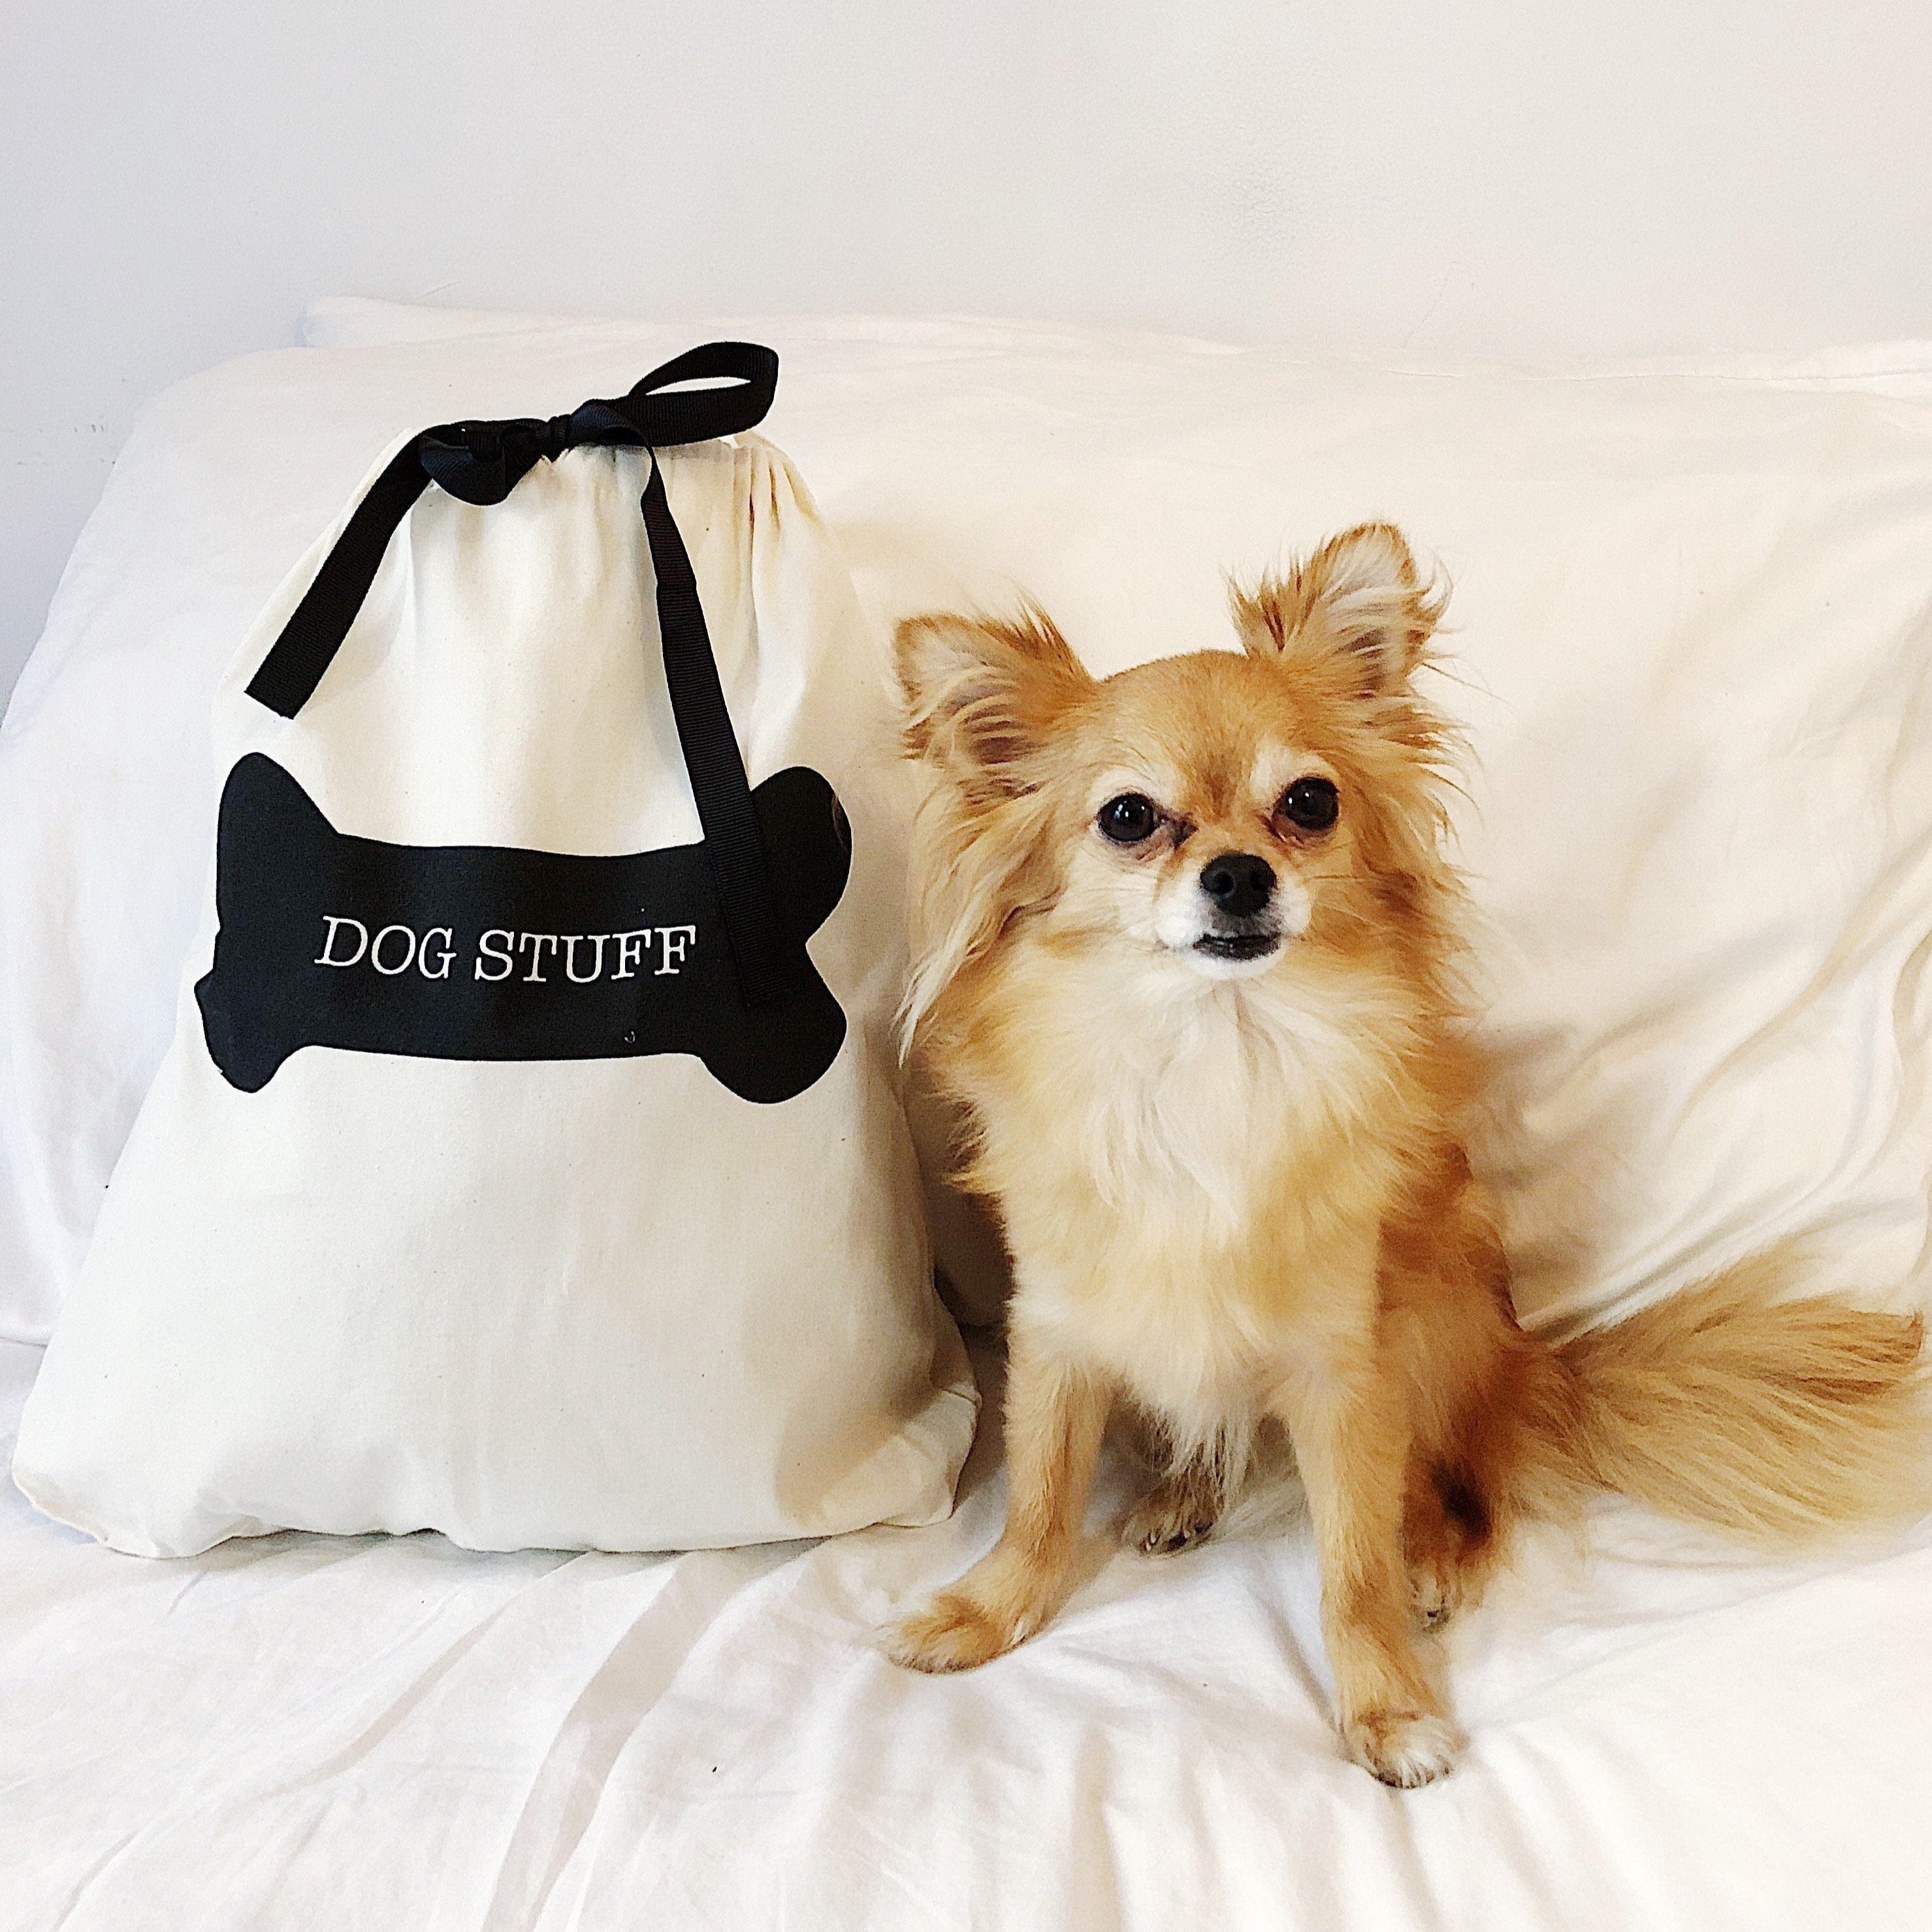 A chihuahua on a bed sitting next to a dog stuff bag. 